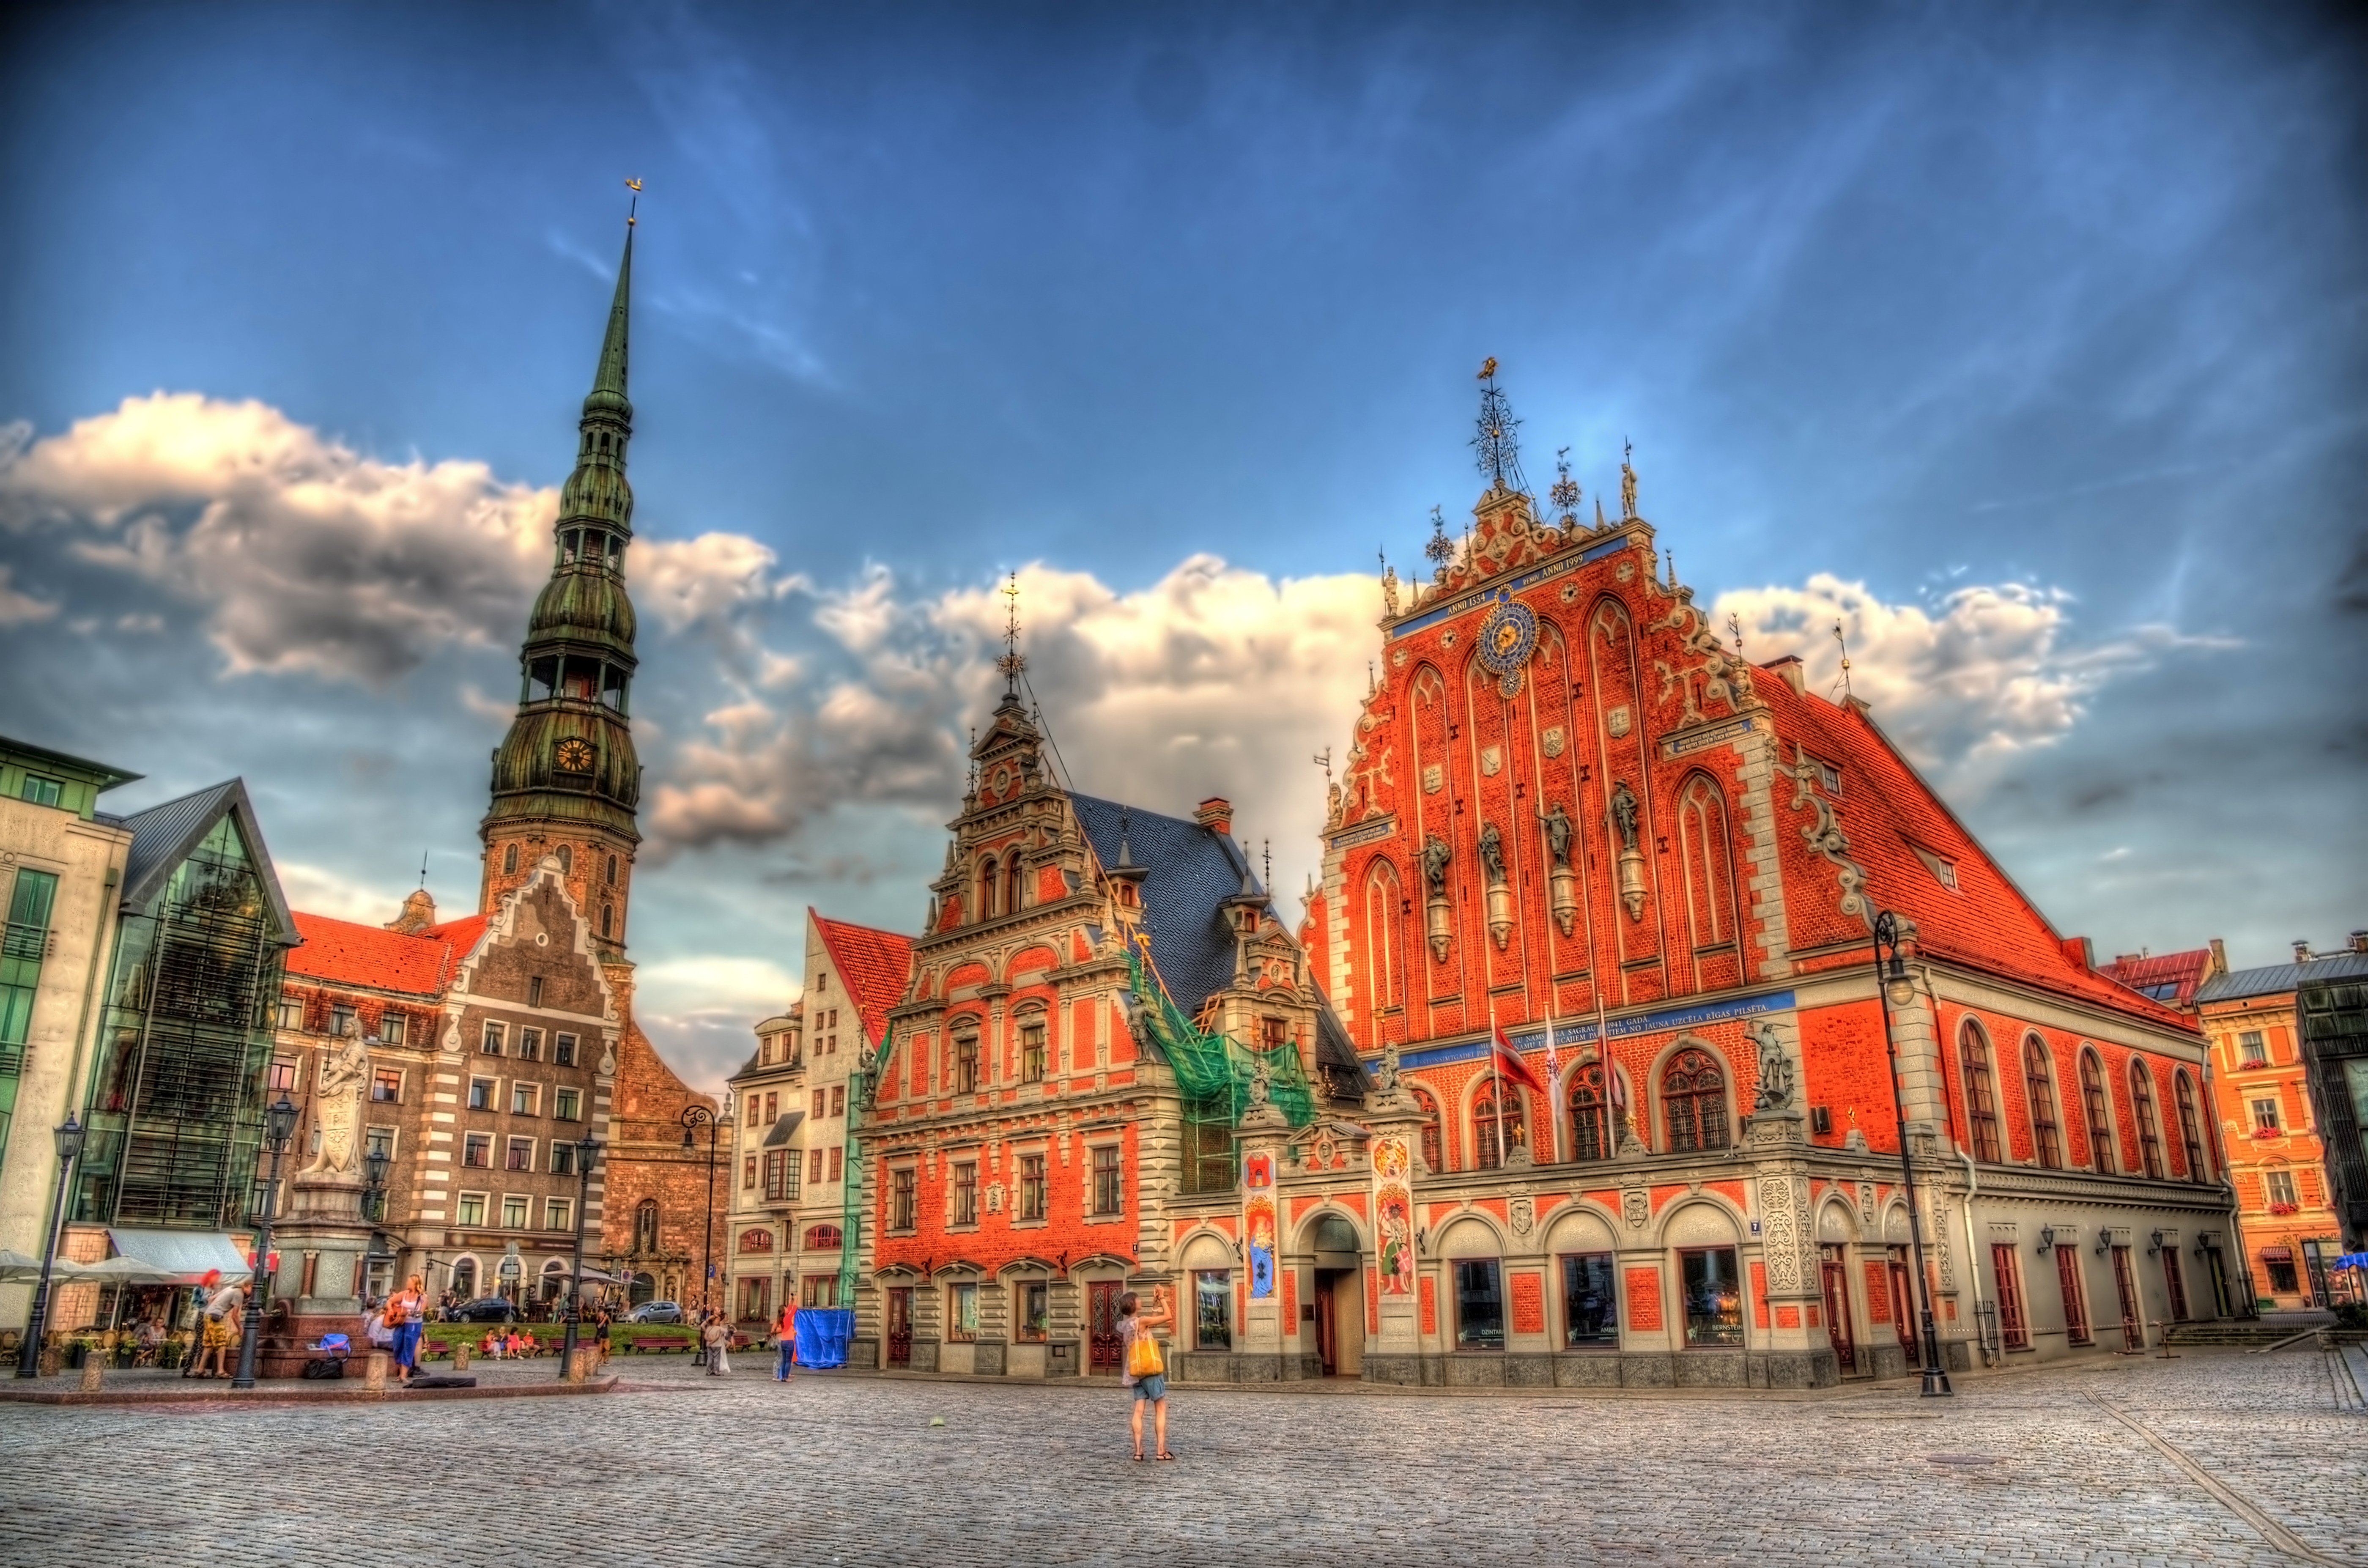 latvia, Houses, Sky, Street, Hdr, Clouds, Riga, Cities Wallpaper